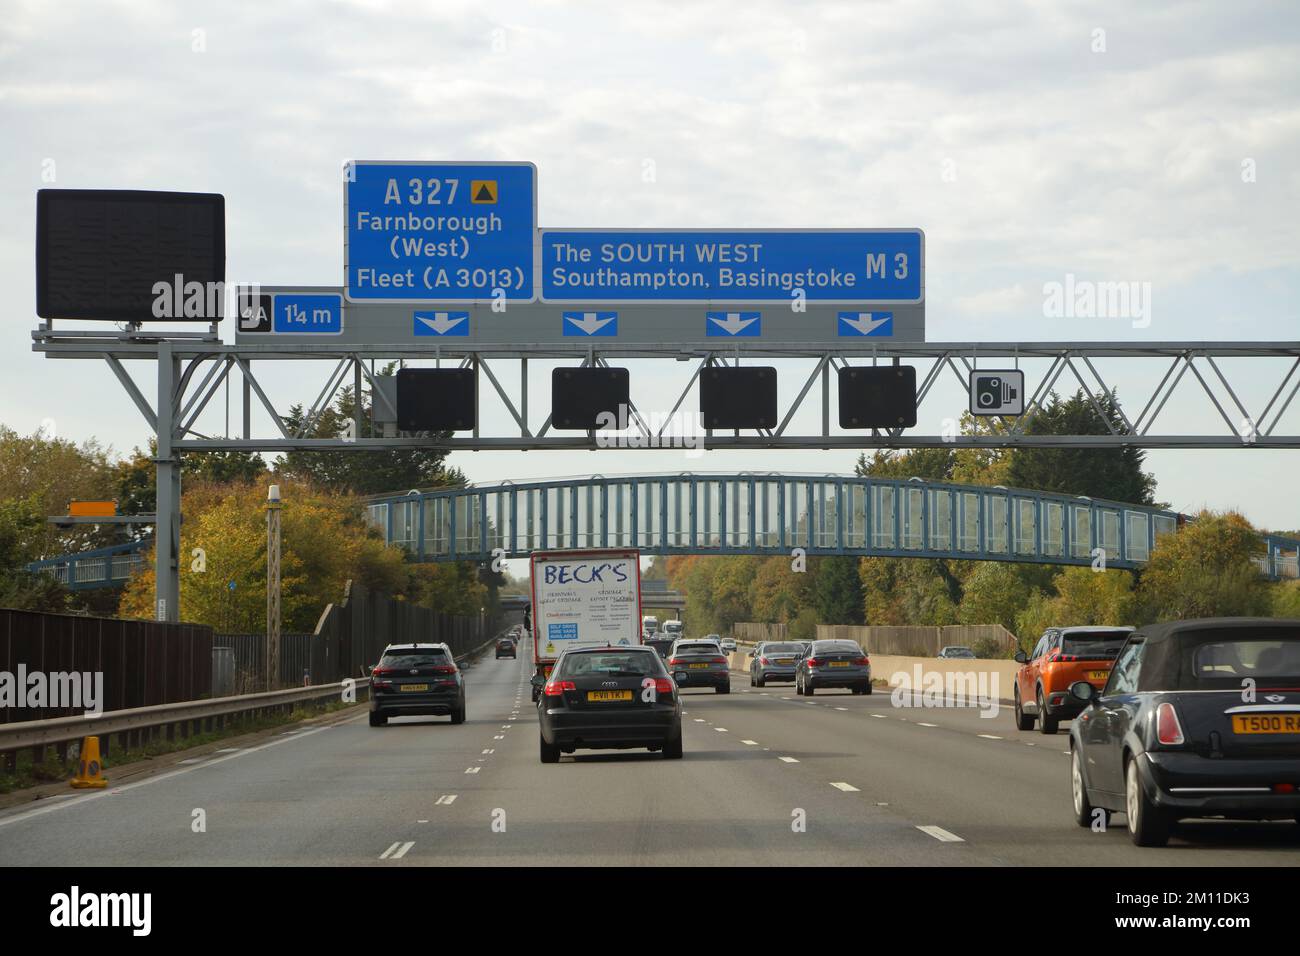 A trip down the M3 Motorway showing all the signage for coming turn offs to various locations, signage is up high on gantries. Stock Photo